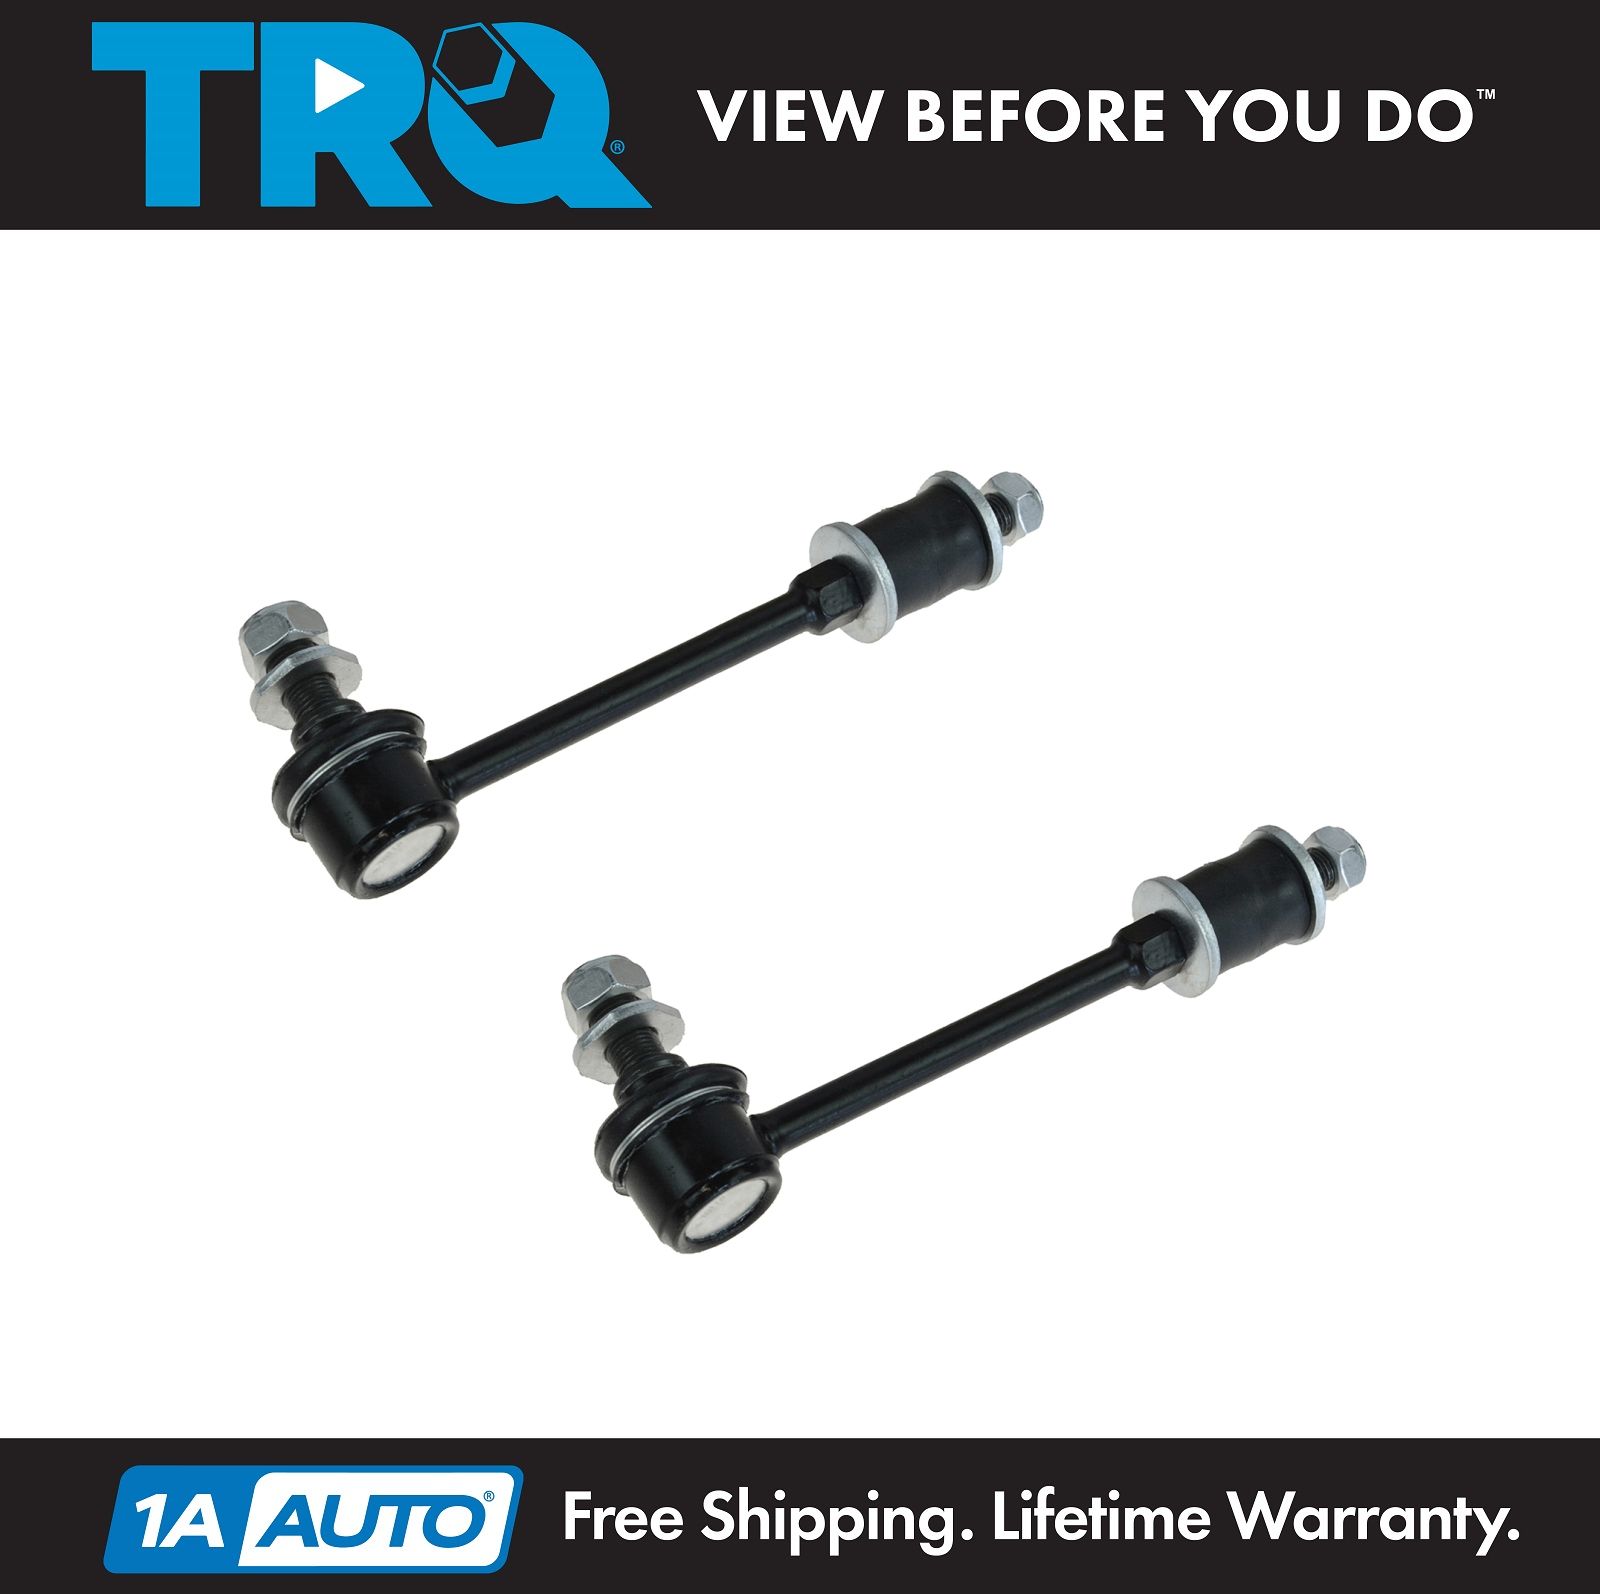 2 Pc Front Suspension Sway Bar Link Kit for Toyota 4Runner Toyota Tacoma Toyota Tundra